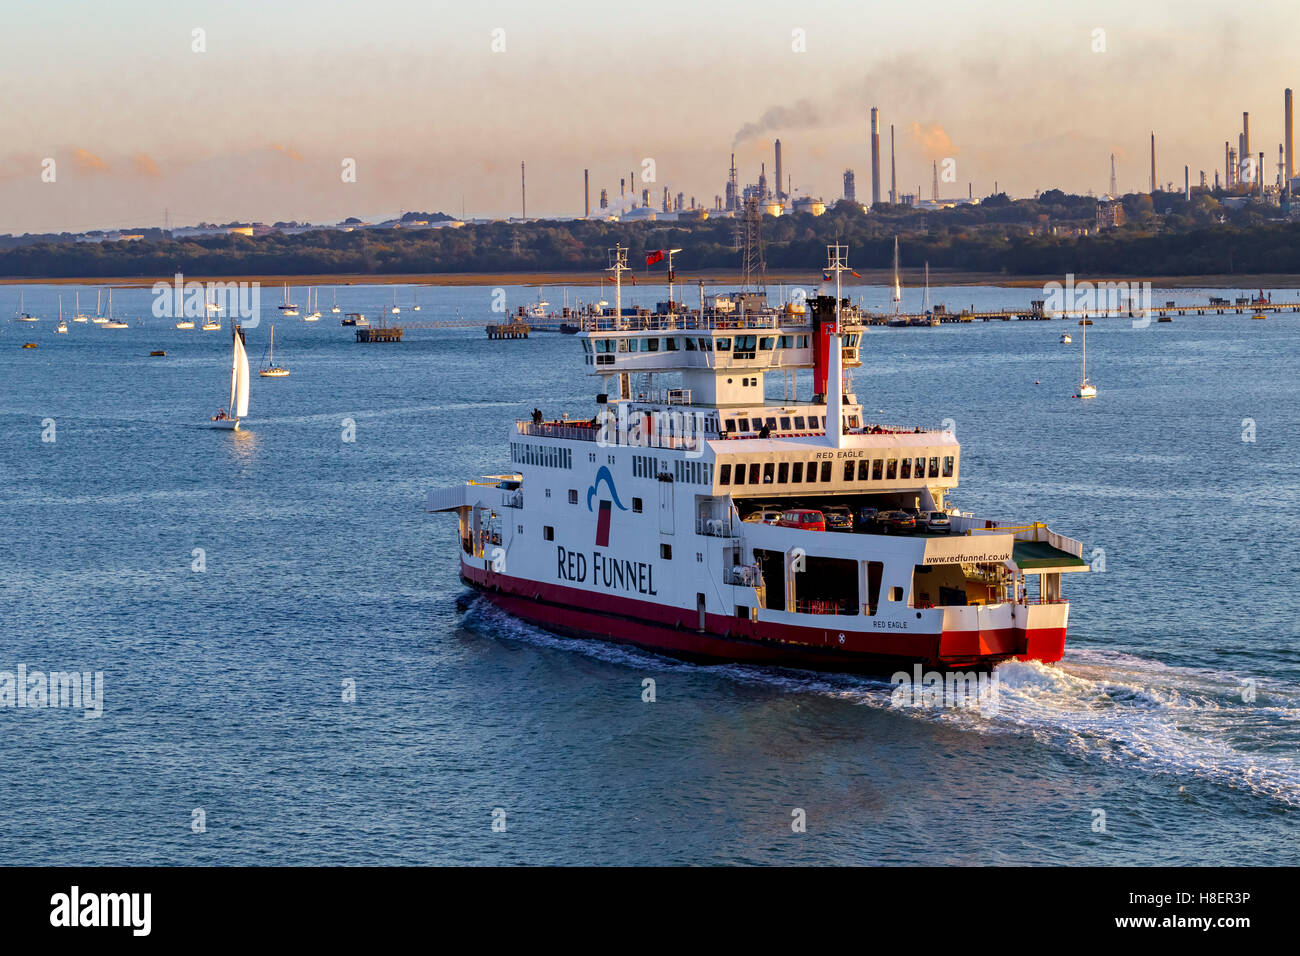 Red Funnel ferry on the way to the Isle of Wight for Southampton. Stock Photo